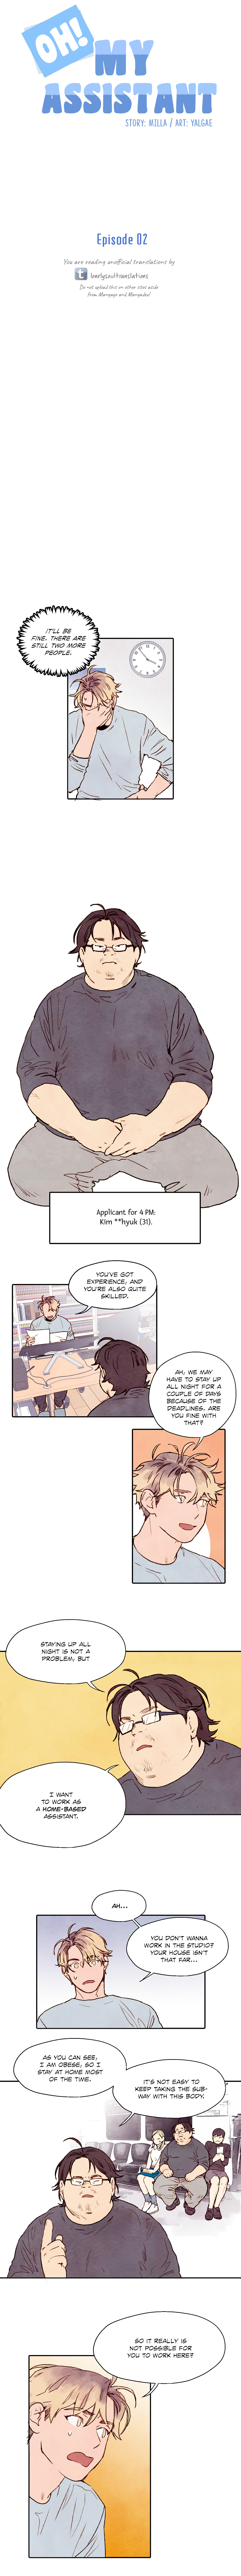 Oh! My Assistant - Page 2